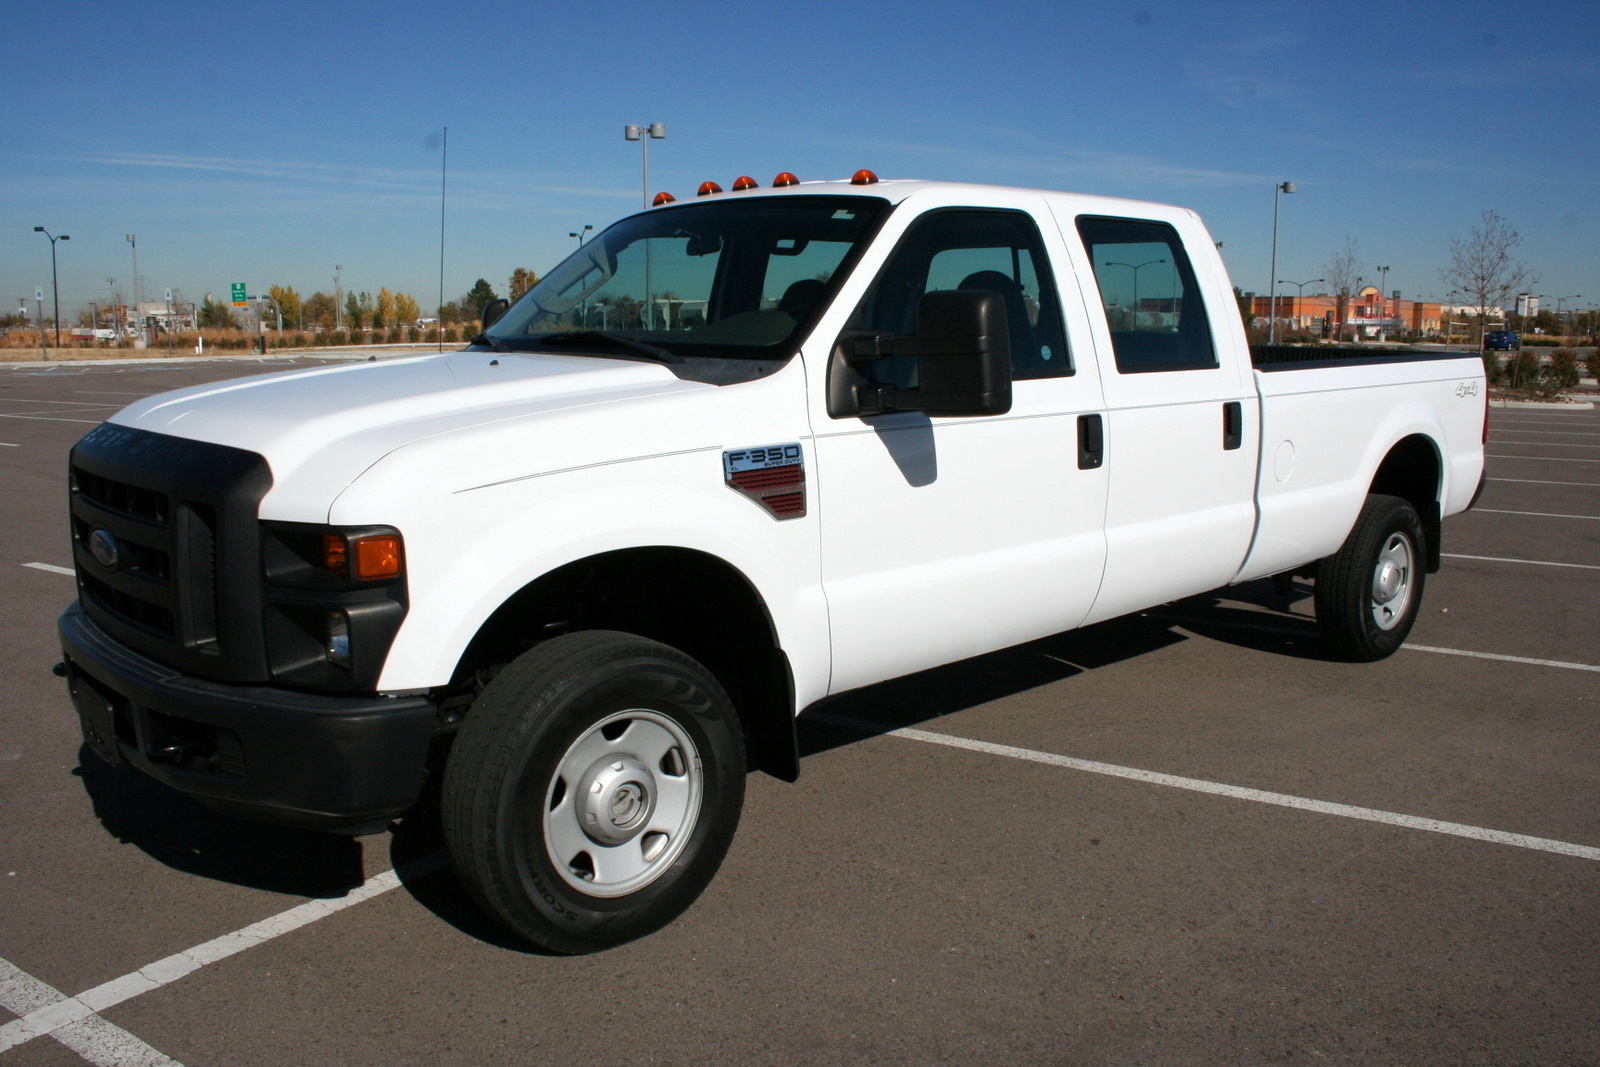 Recall on the 2008 ford f350 super duty #1